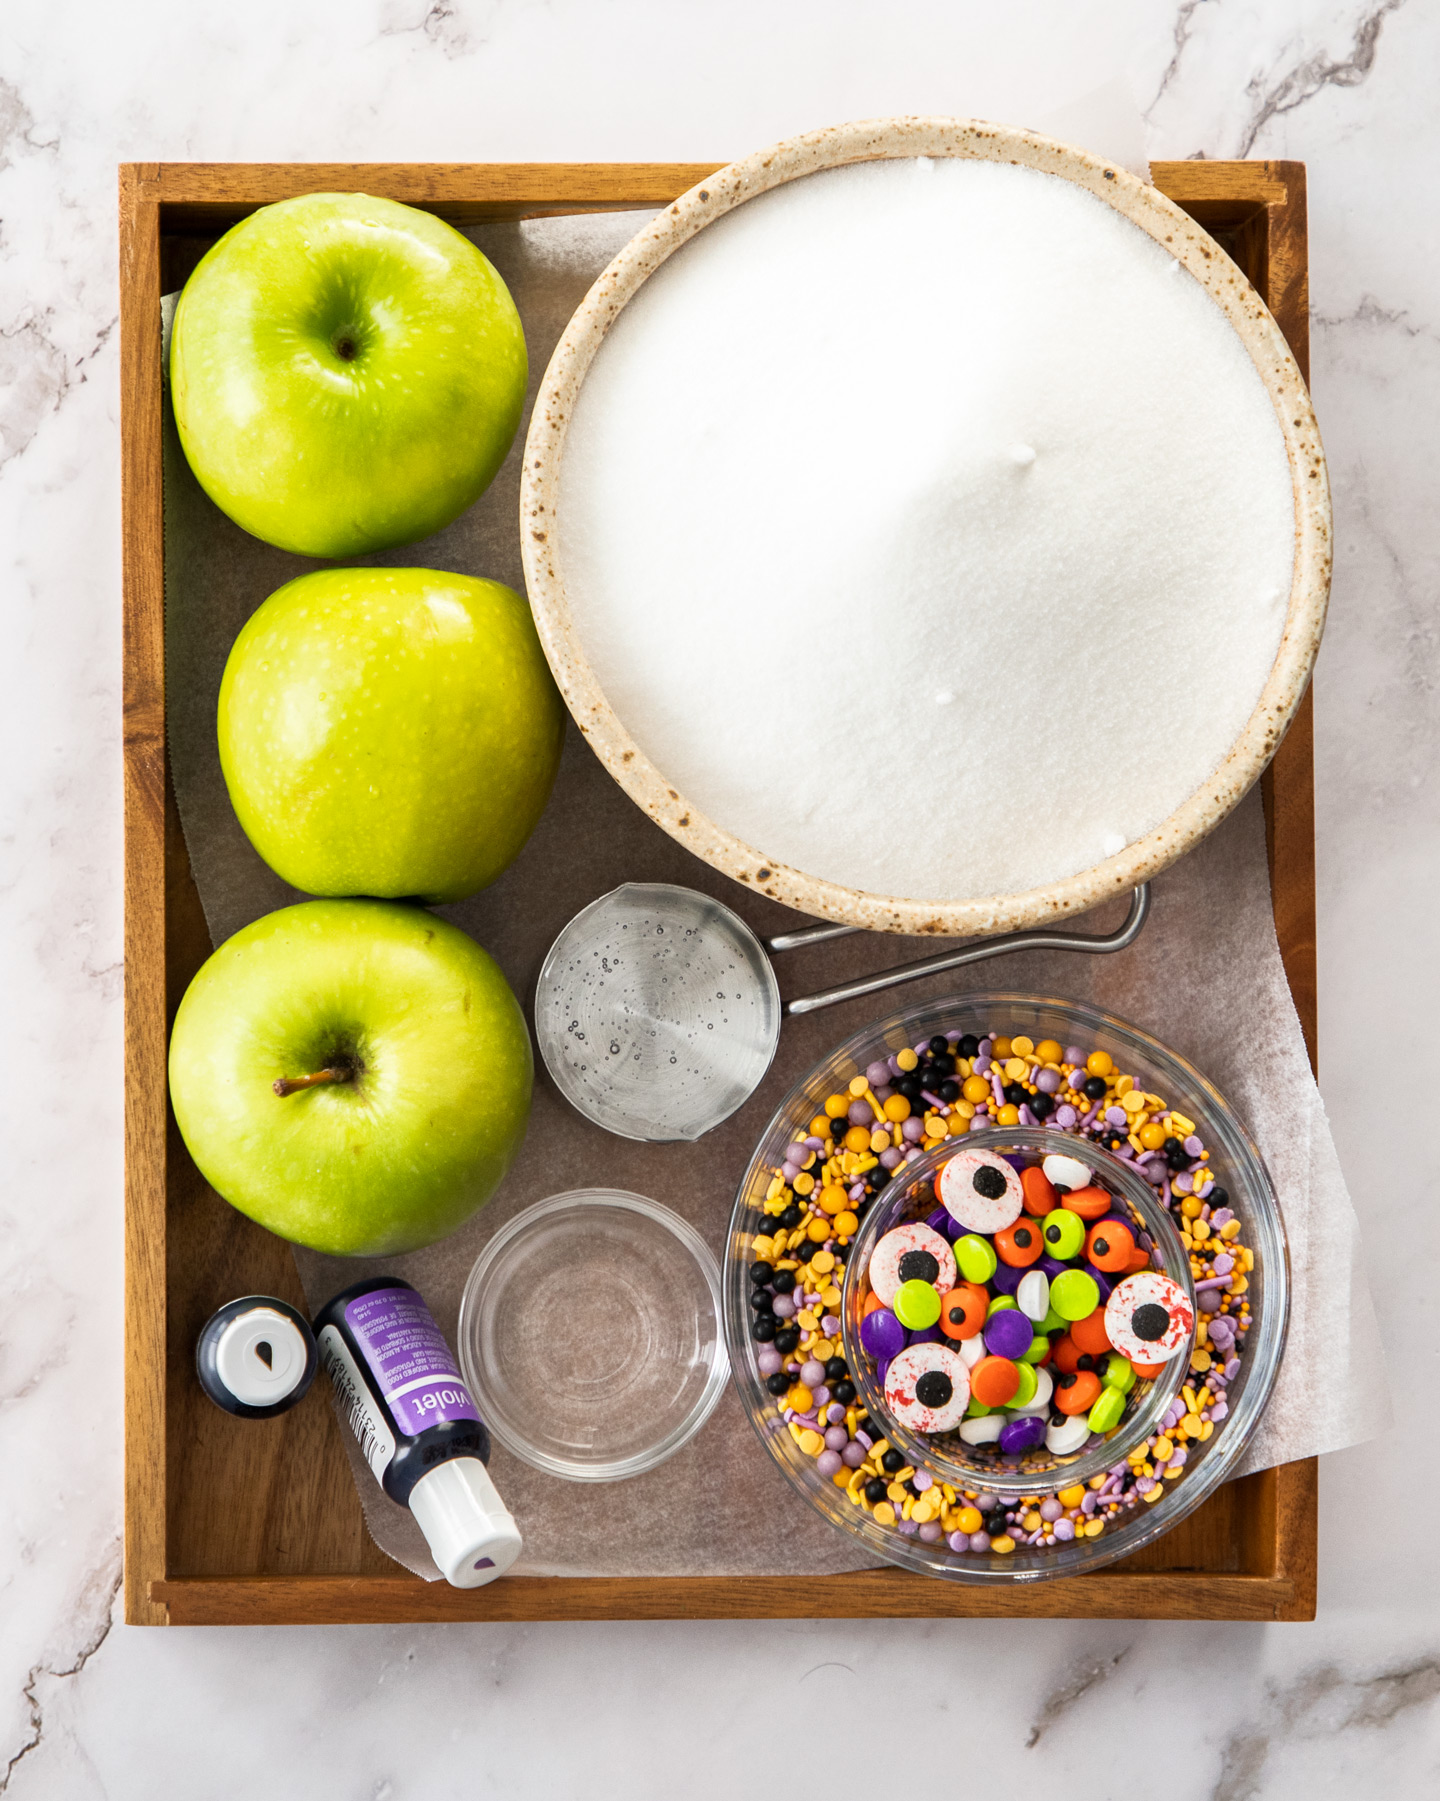 Ingredients for halloween candy apples on a wooden tray.